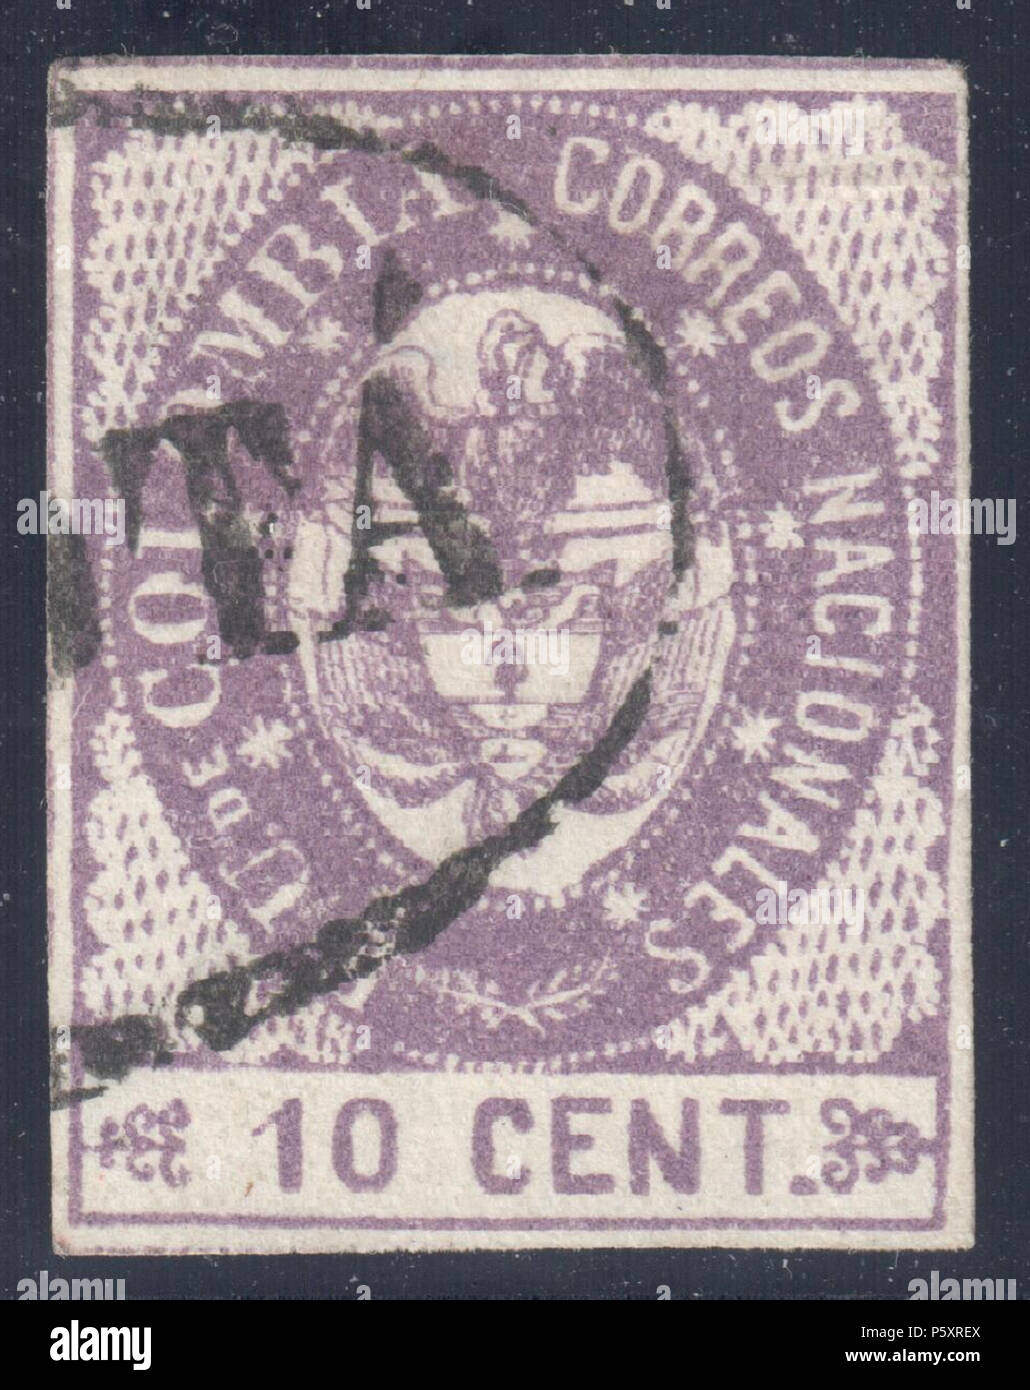 N/A. English: Colombia 1865 10c violet, used '(BOGO)TA'. Signed. Catalogue: Sc. 38, Mi. 29 Paper: White wove unwtmk Perforation: imperforated Printing: Lithography Printer: Ayala Medrano Printing Ltd, Bogota . 1865. Colombian government 367 Colombia 1865 Sc38 Stock Photo